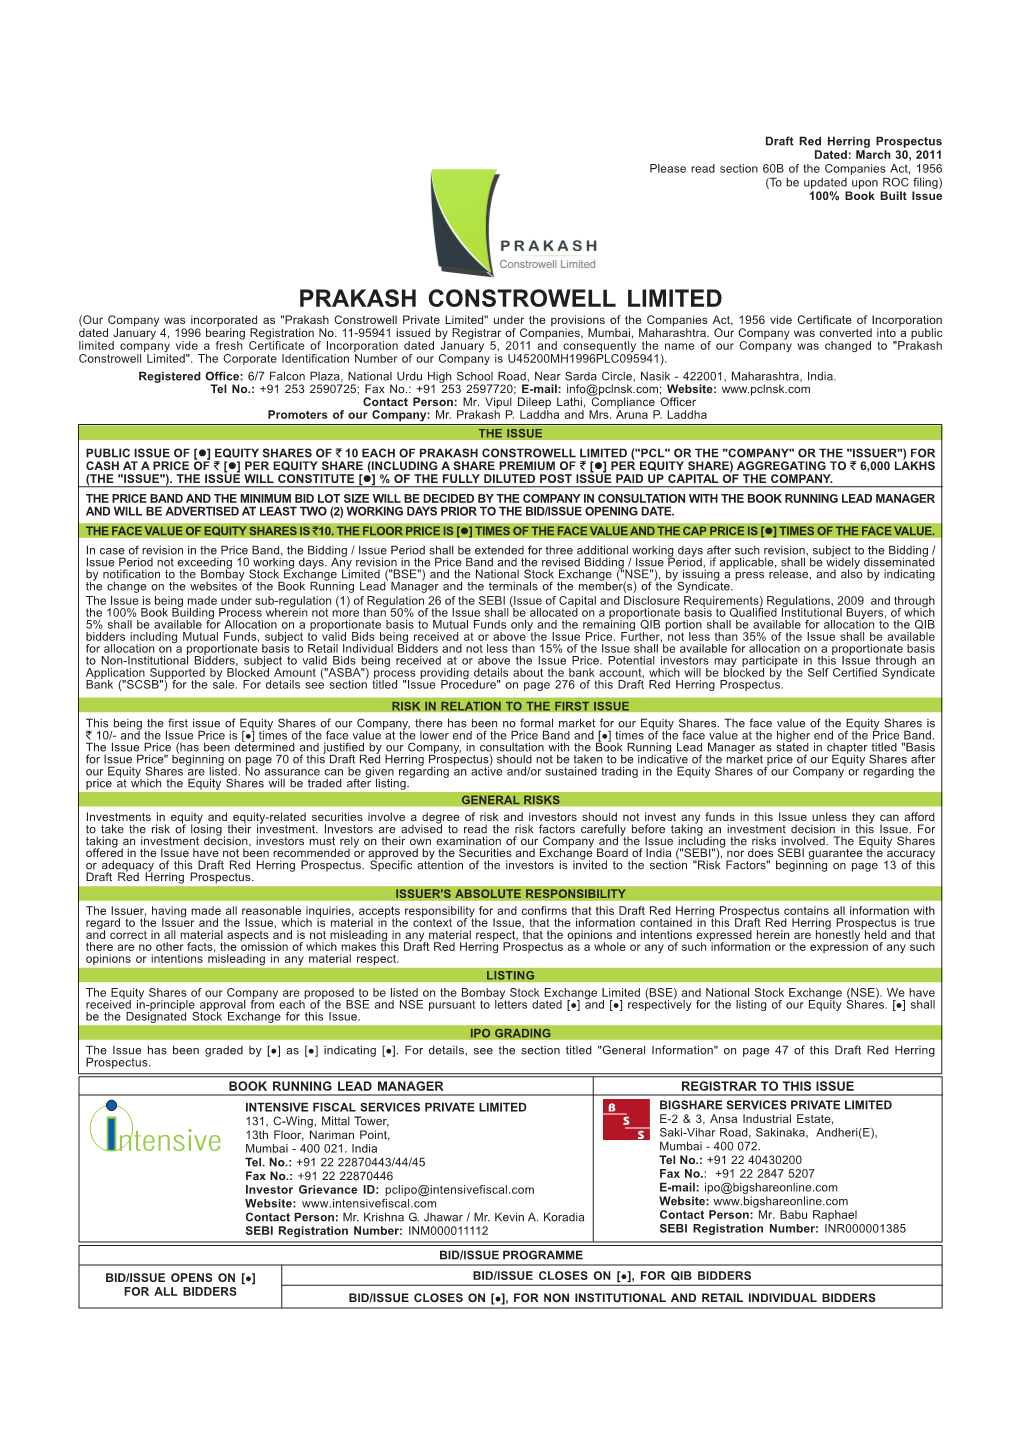 Prakash Constrowell Limited